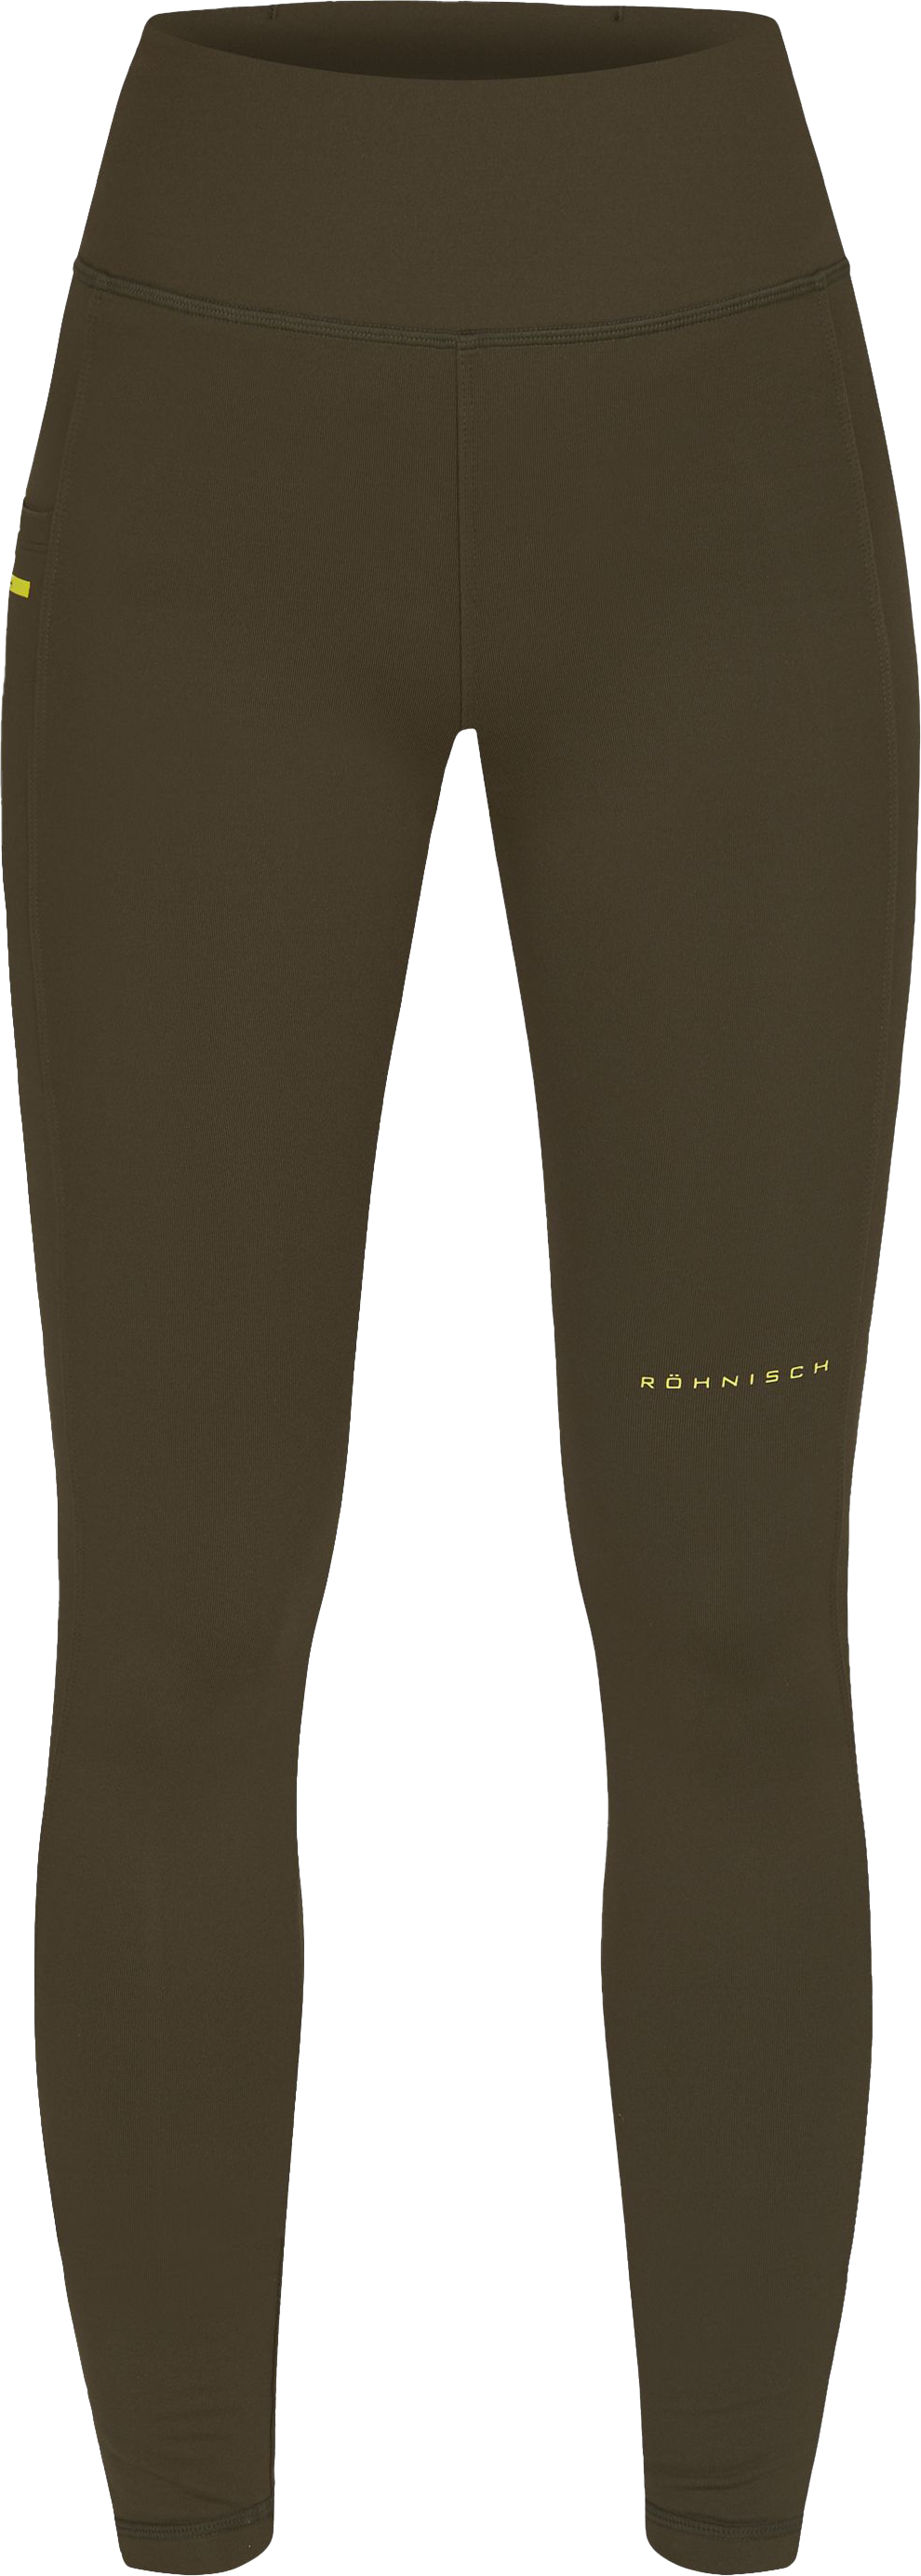 https://www.fjellsport.no/assets/blobs/rohnisch-women-s-thermal-tights-forest-brown-3e49e11470.png